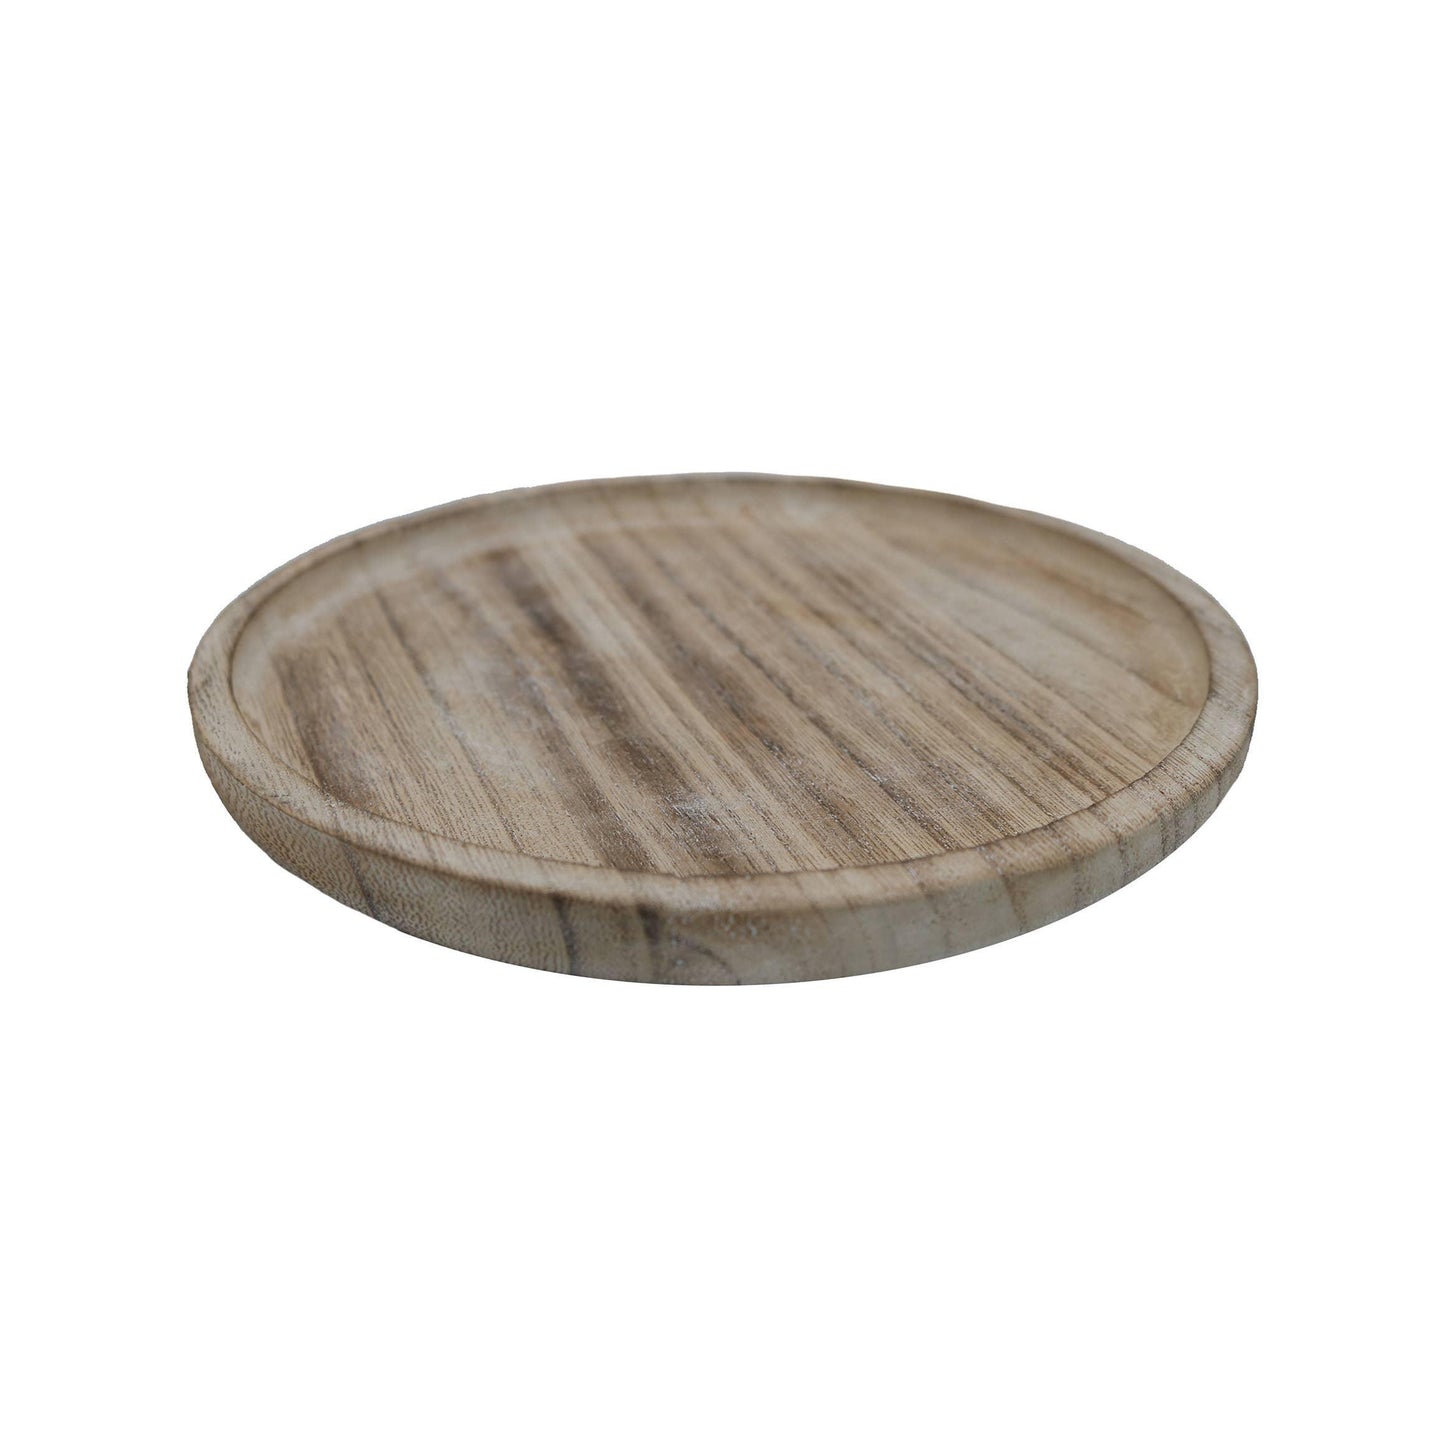 Round Wood Tray - Rustic - 7x7" - The Silver Dahlia